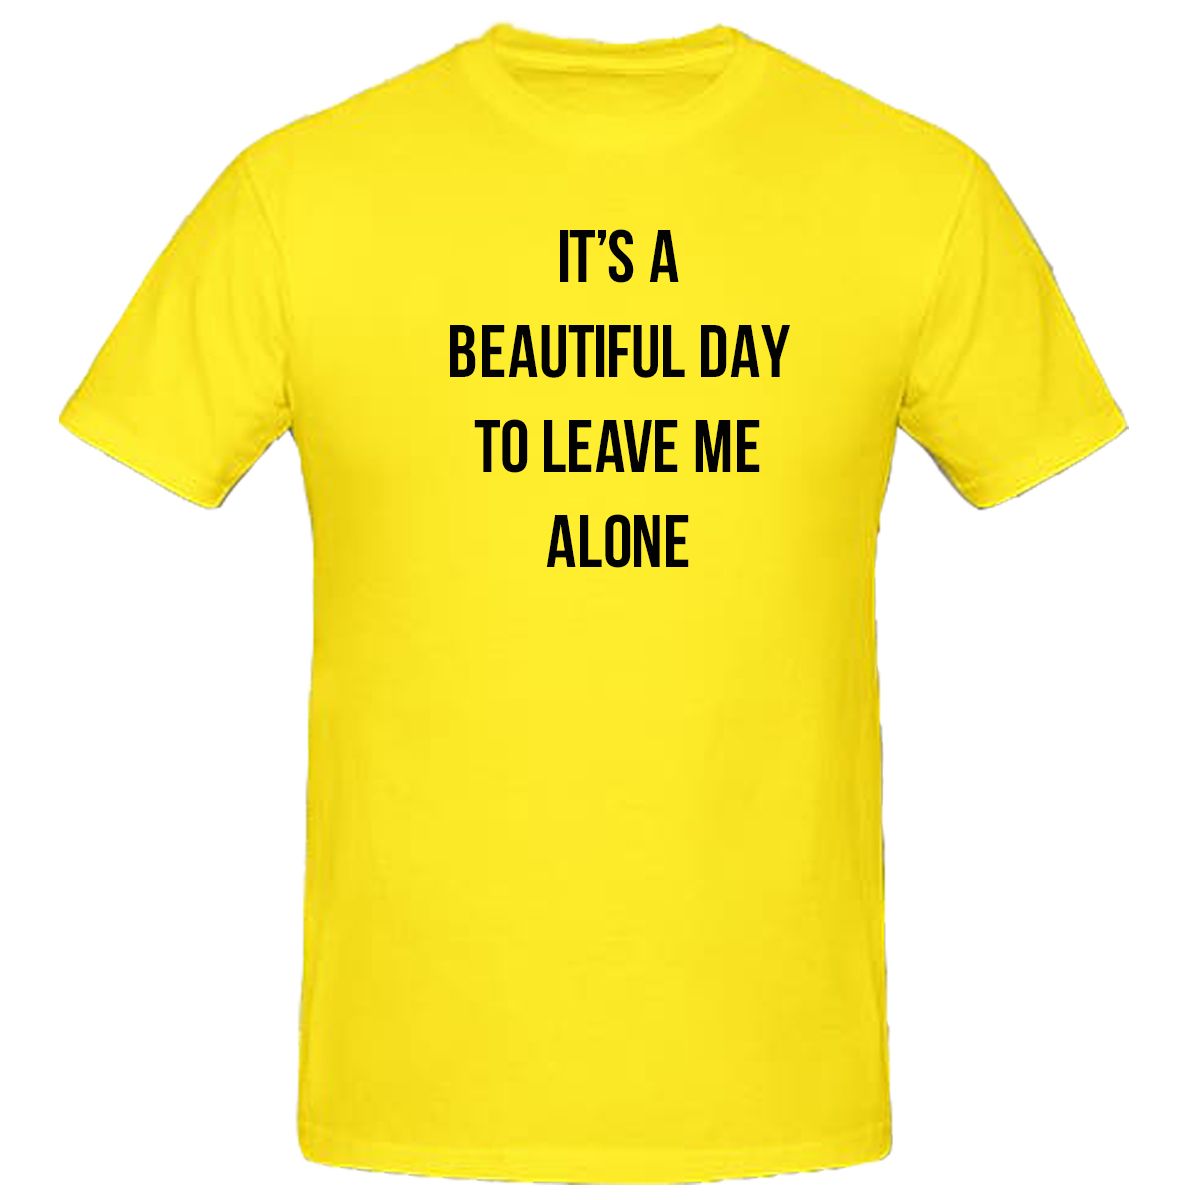 It's A Beautiful Day to Leave Me Alone T-Shirt